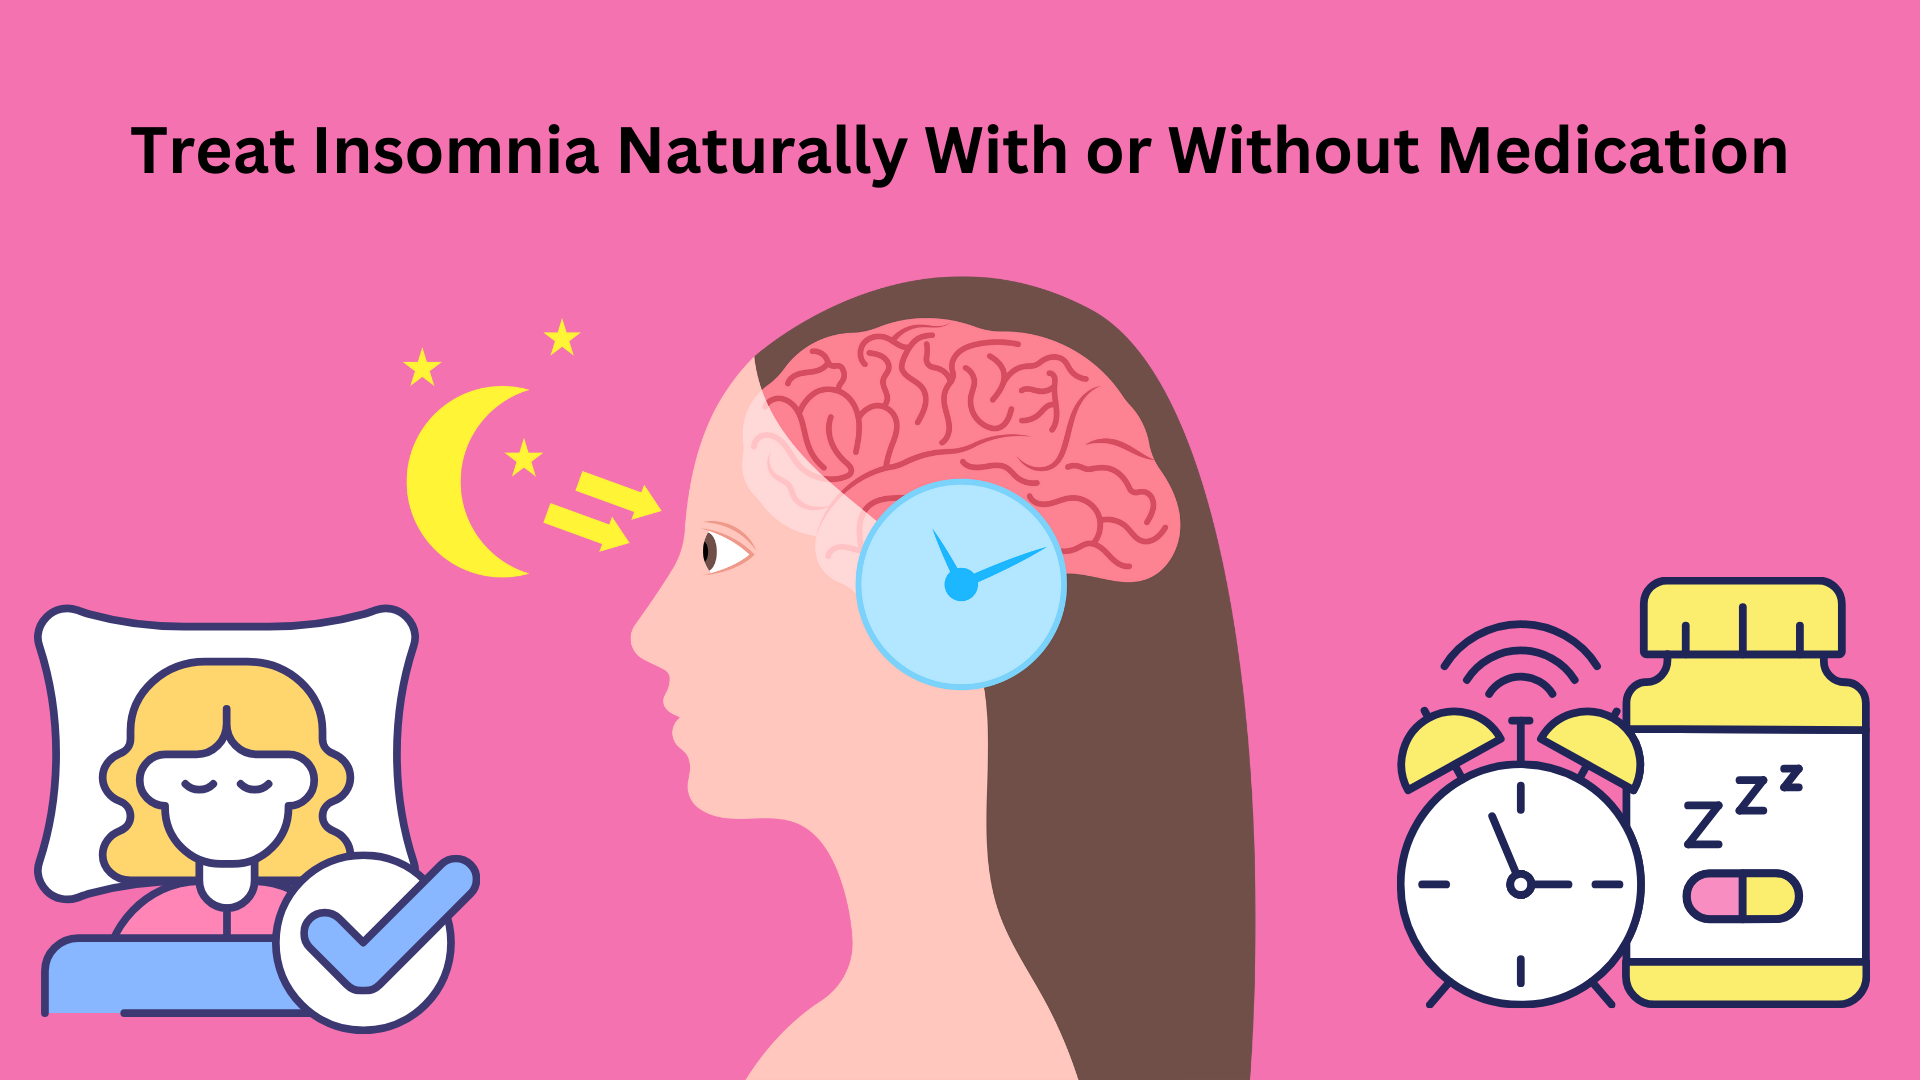 How to Treat Insomnia Naturally With or Without Medication? 2